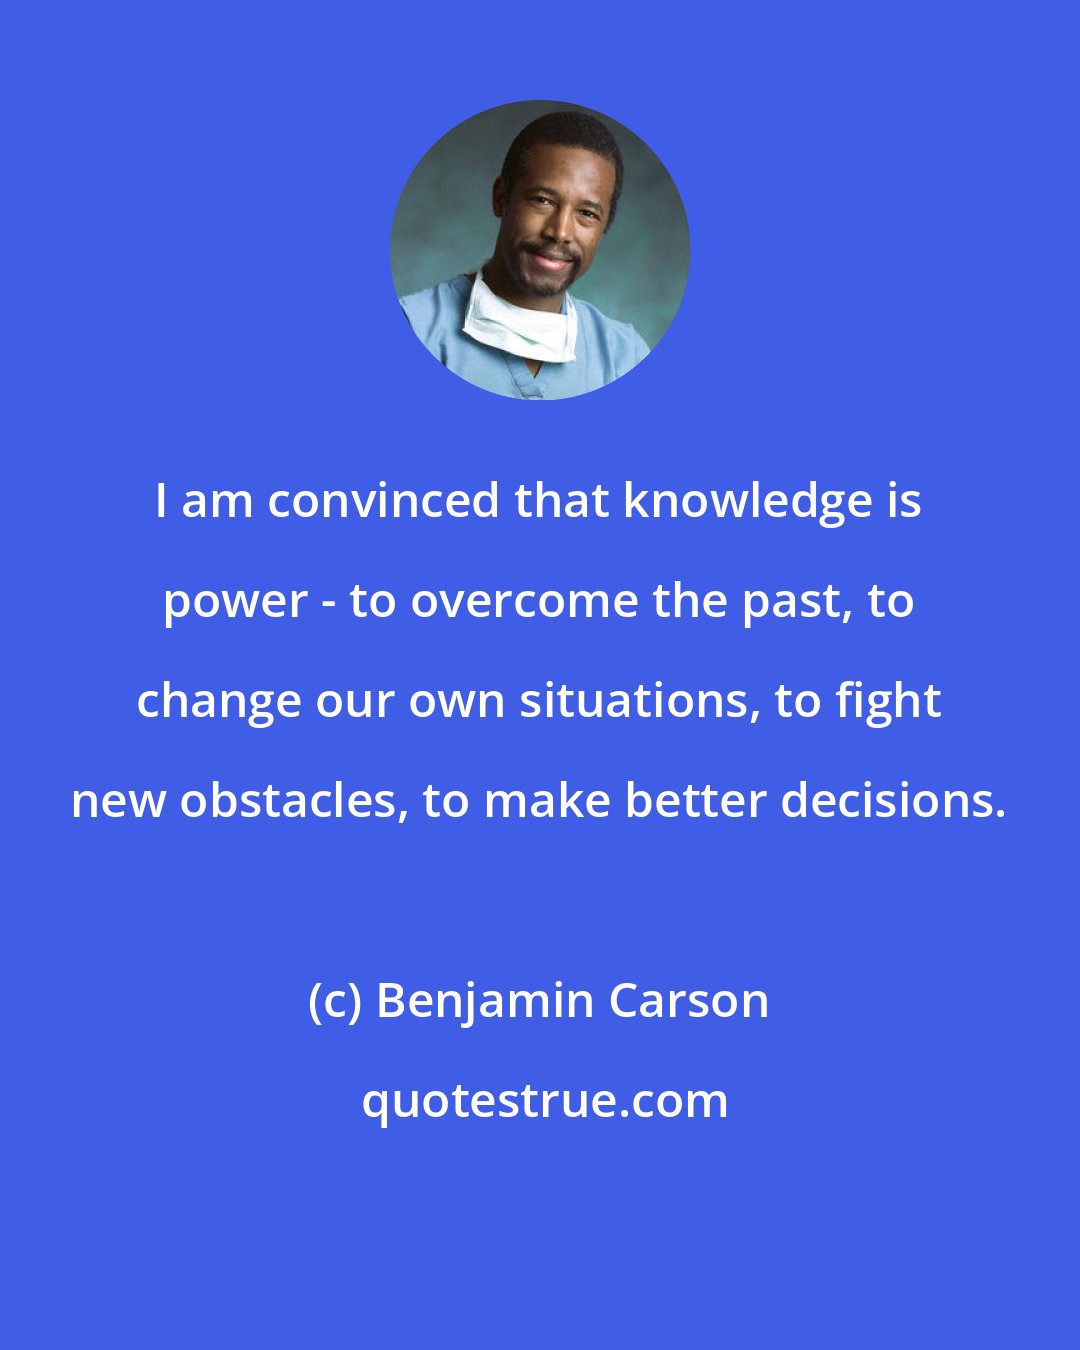 Benjamin Carson: I am convinced that knowledge is power - to overcome the past, to change our own situations, to fight new obstacles, to make better decisions.